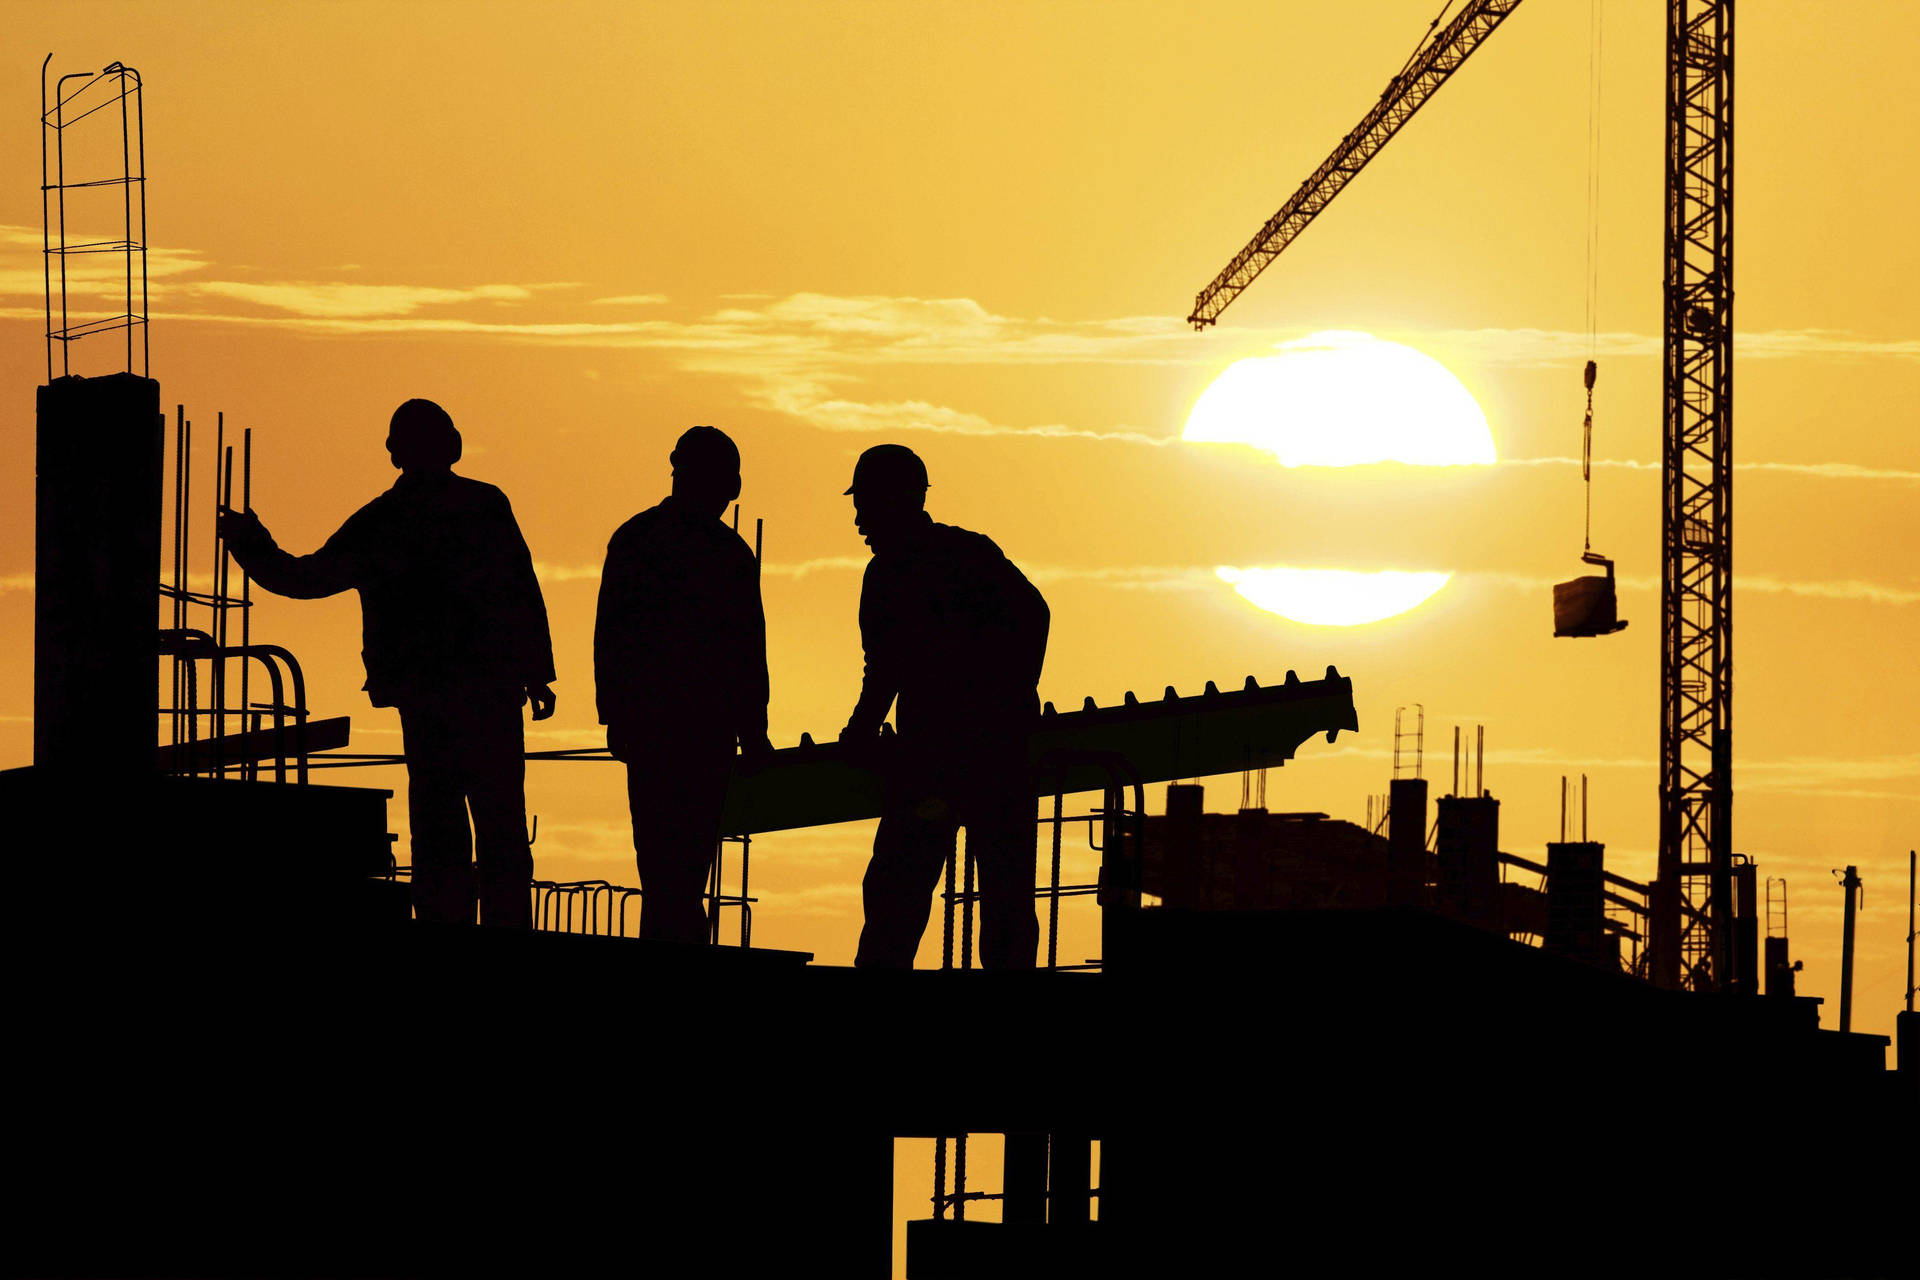 Three Silhouetted Construction Workers Wallpaper